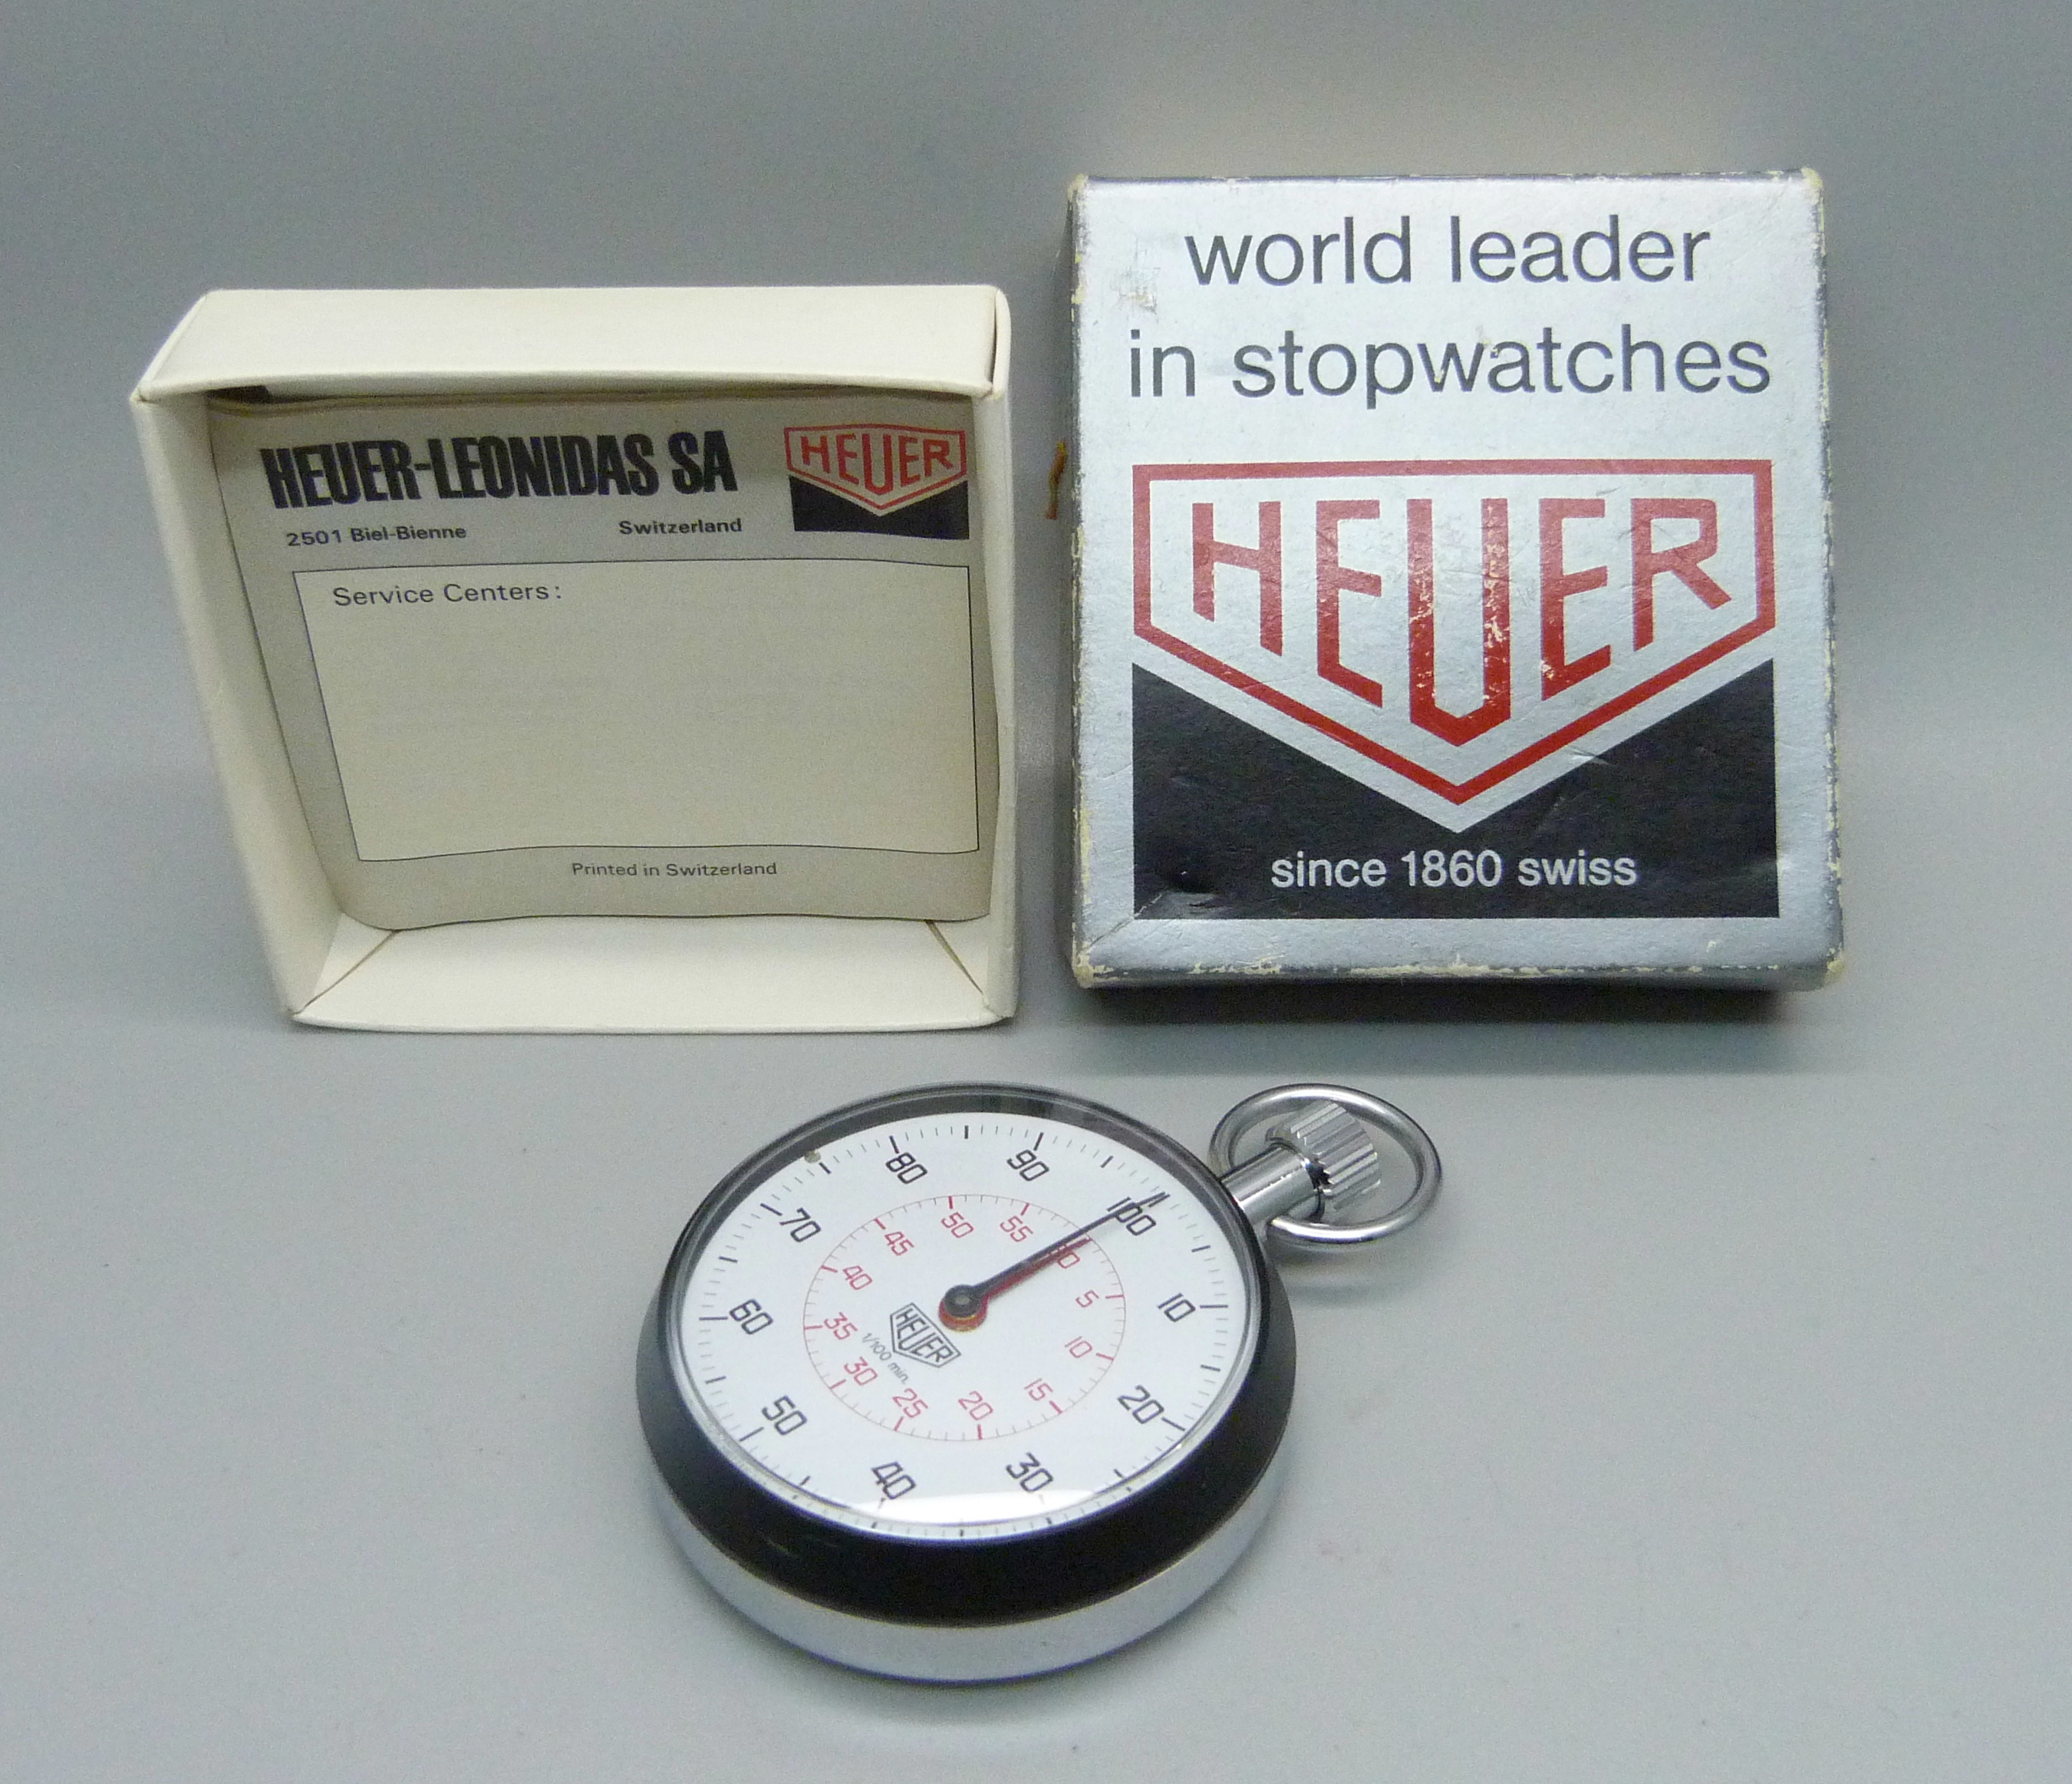 A Heuer stopwatch, boxed